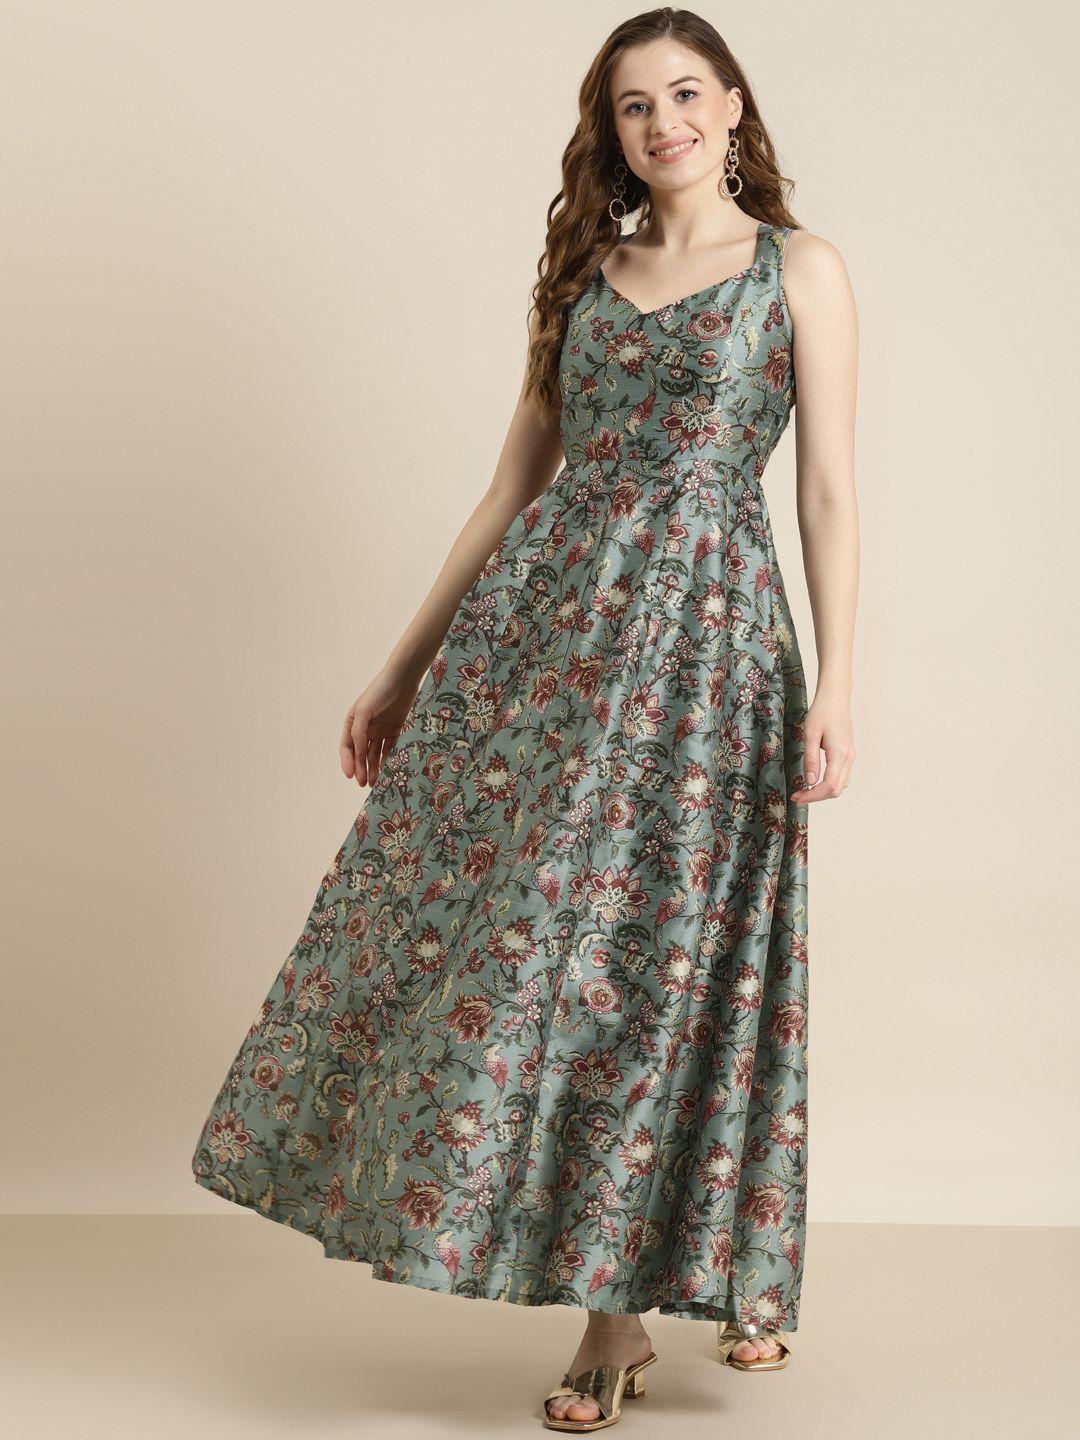 shae by sassafras olive green & maroon floral maxi dress